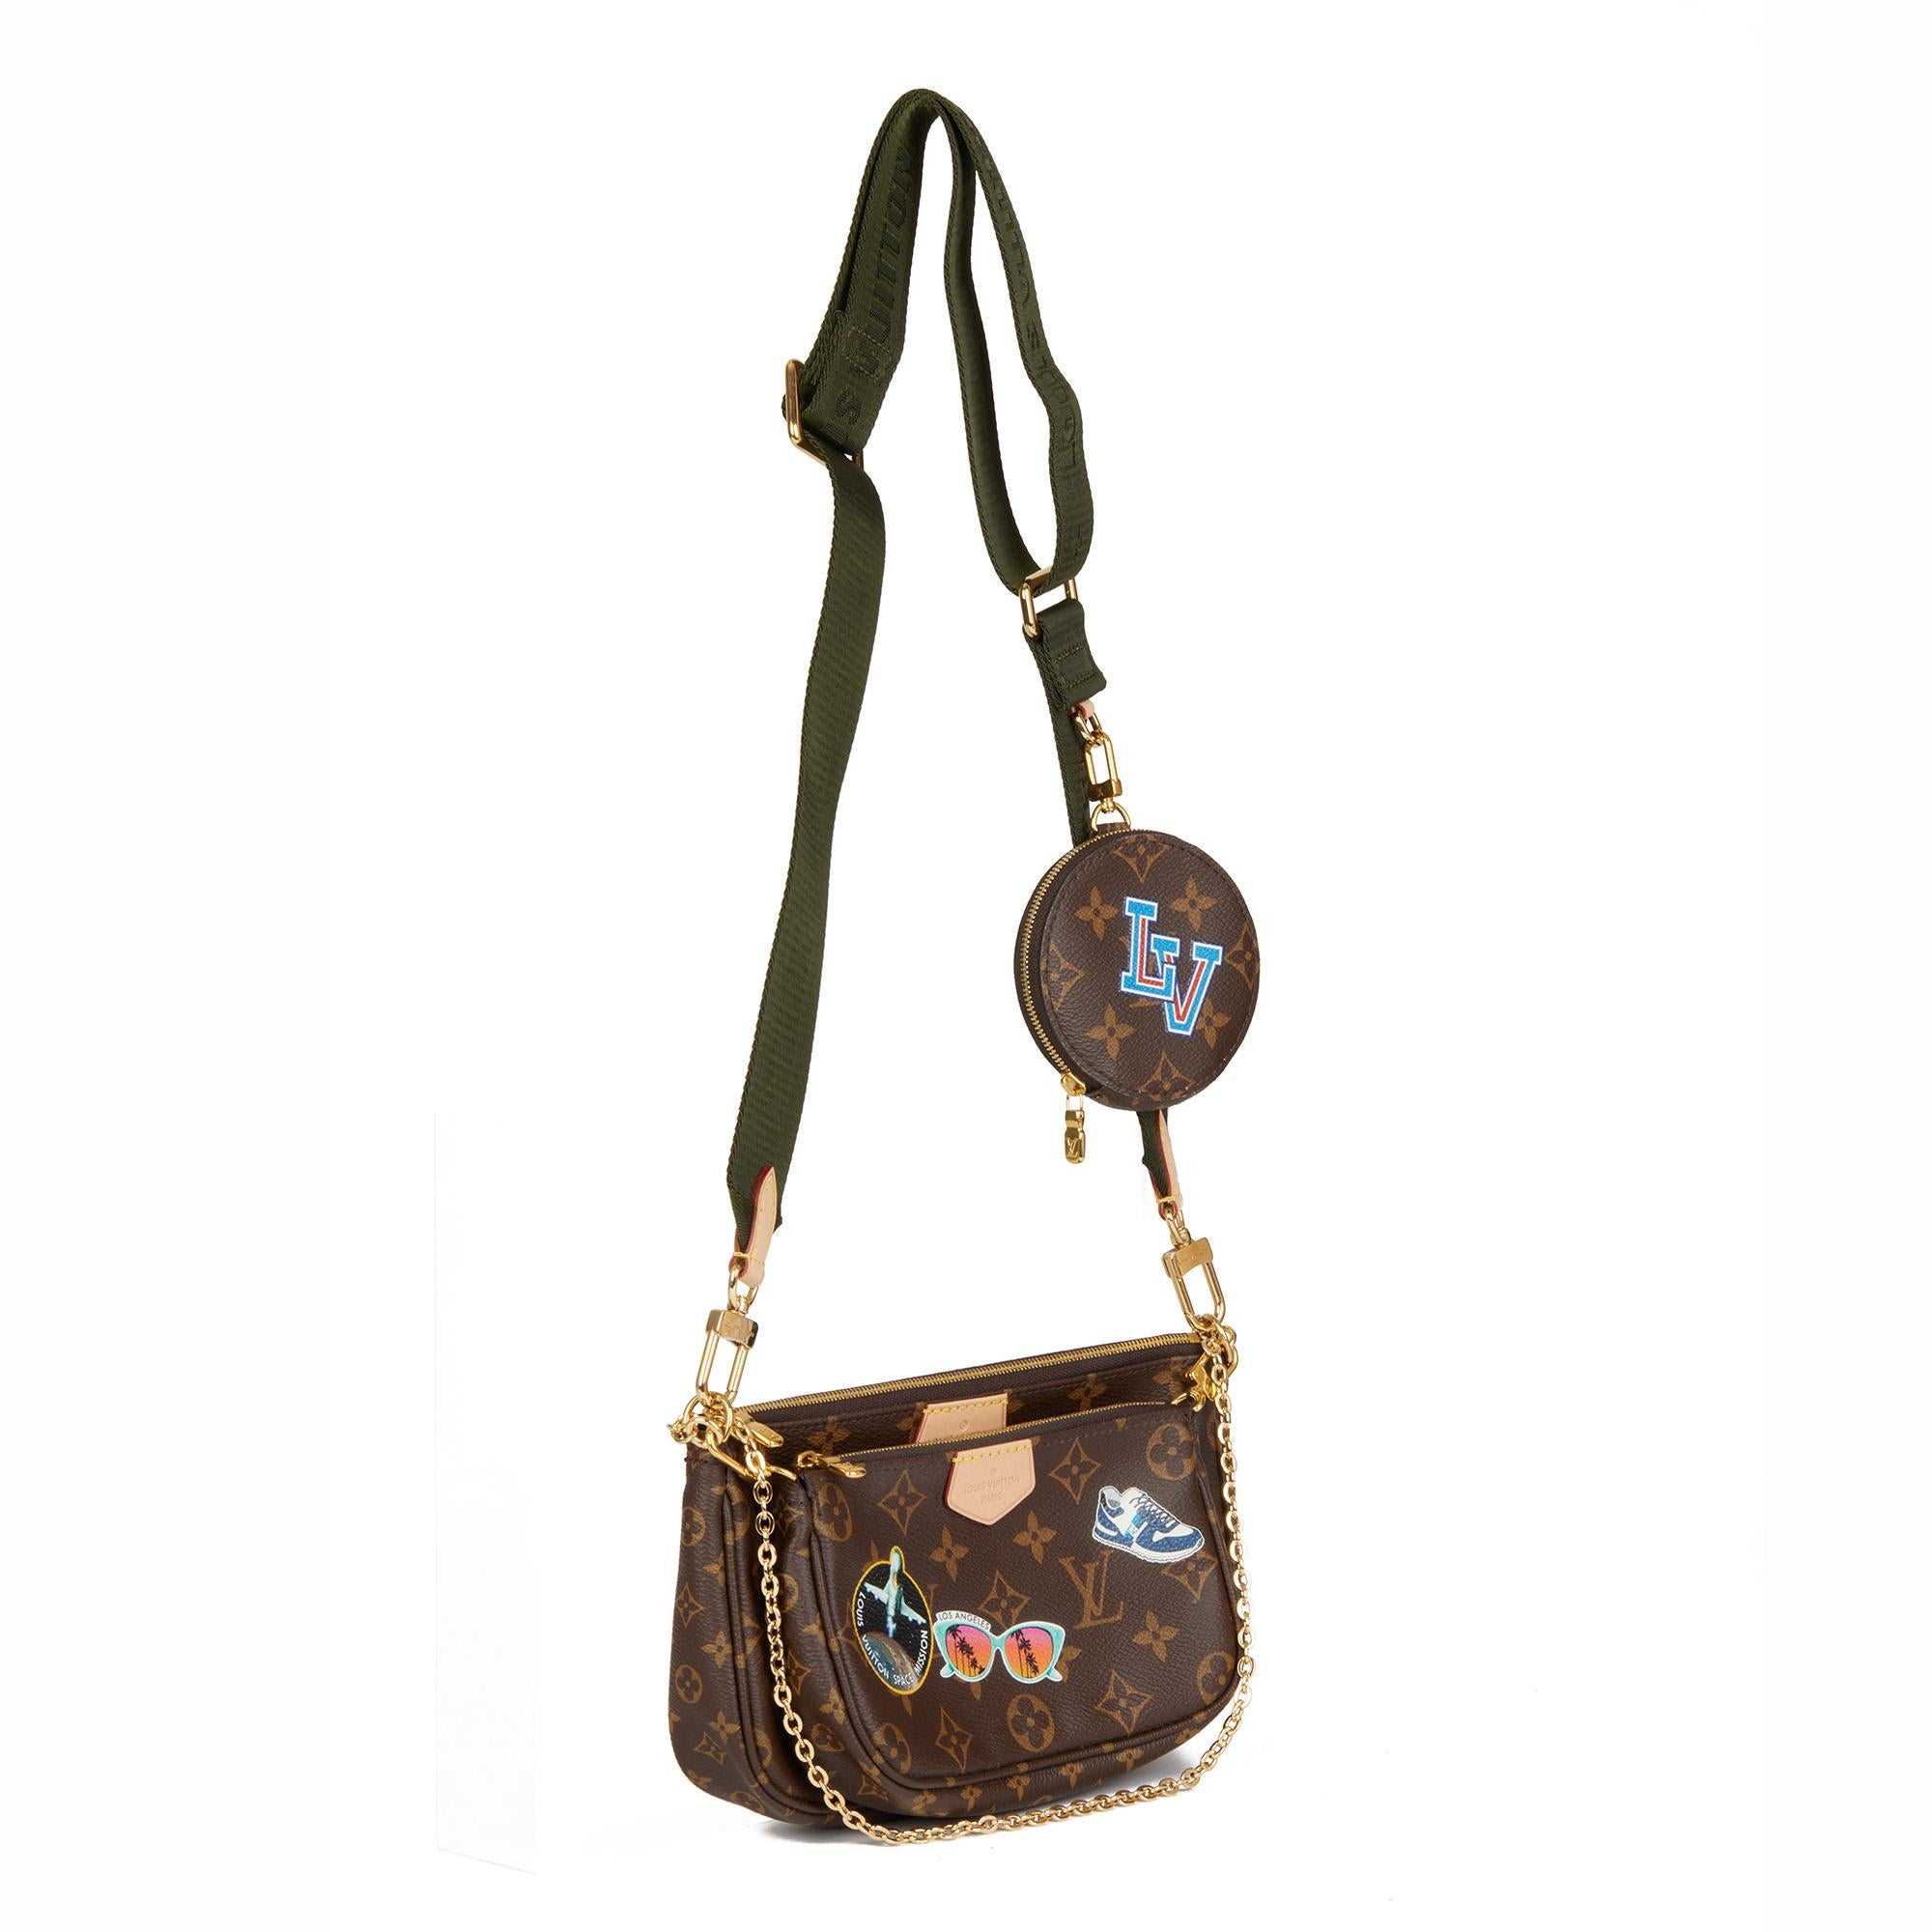 LOUIS VUITTON
Brown Monogram Coated Canvas & Khaki Jacquard My World Tour Multi Pochette Accessoires

Xupes Reference: CB593
Serial Number: SP3240
Age (Circa): 2020
Accompanied By: Louis Vuitton Dust Bag, Box, Tag
Authenticity Details: Date Stamp